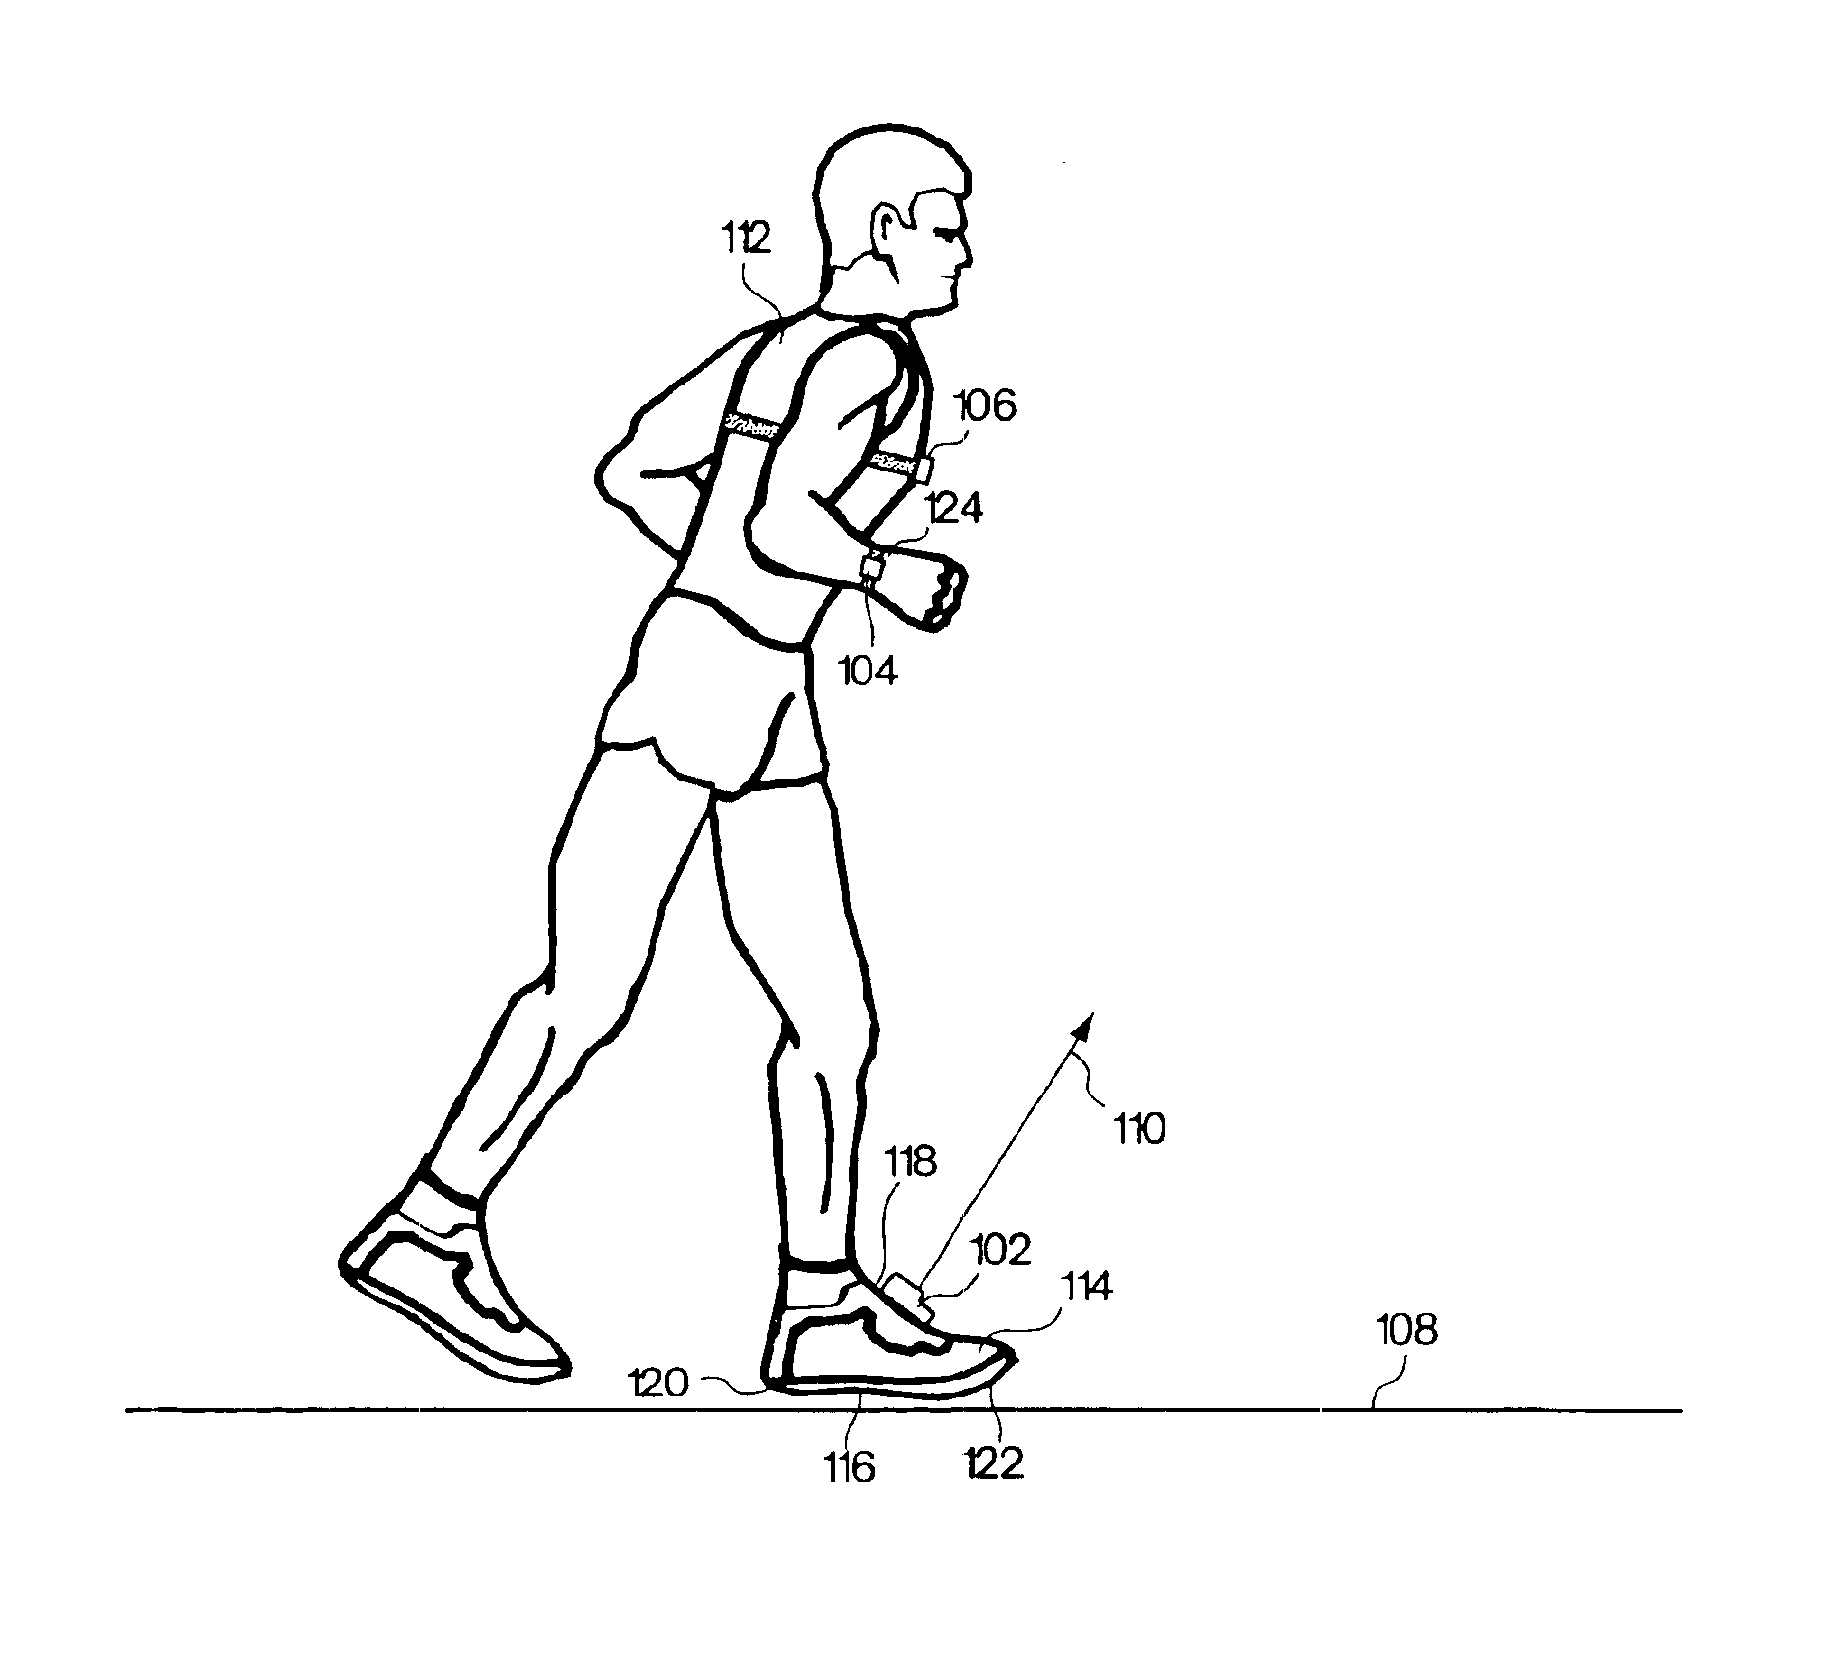 Monitoring activity of a user in locomotion on foot